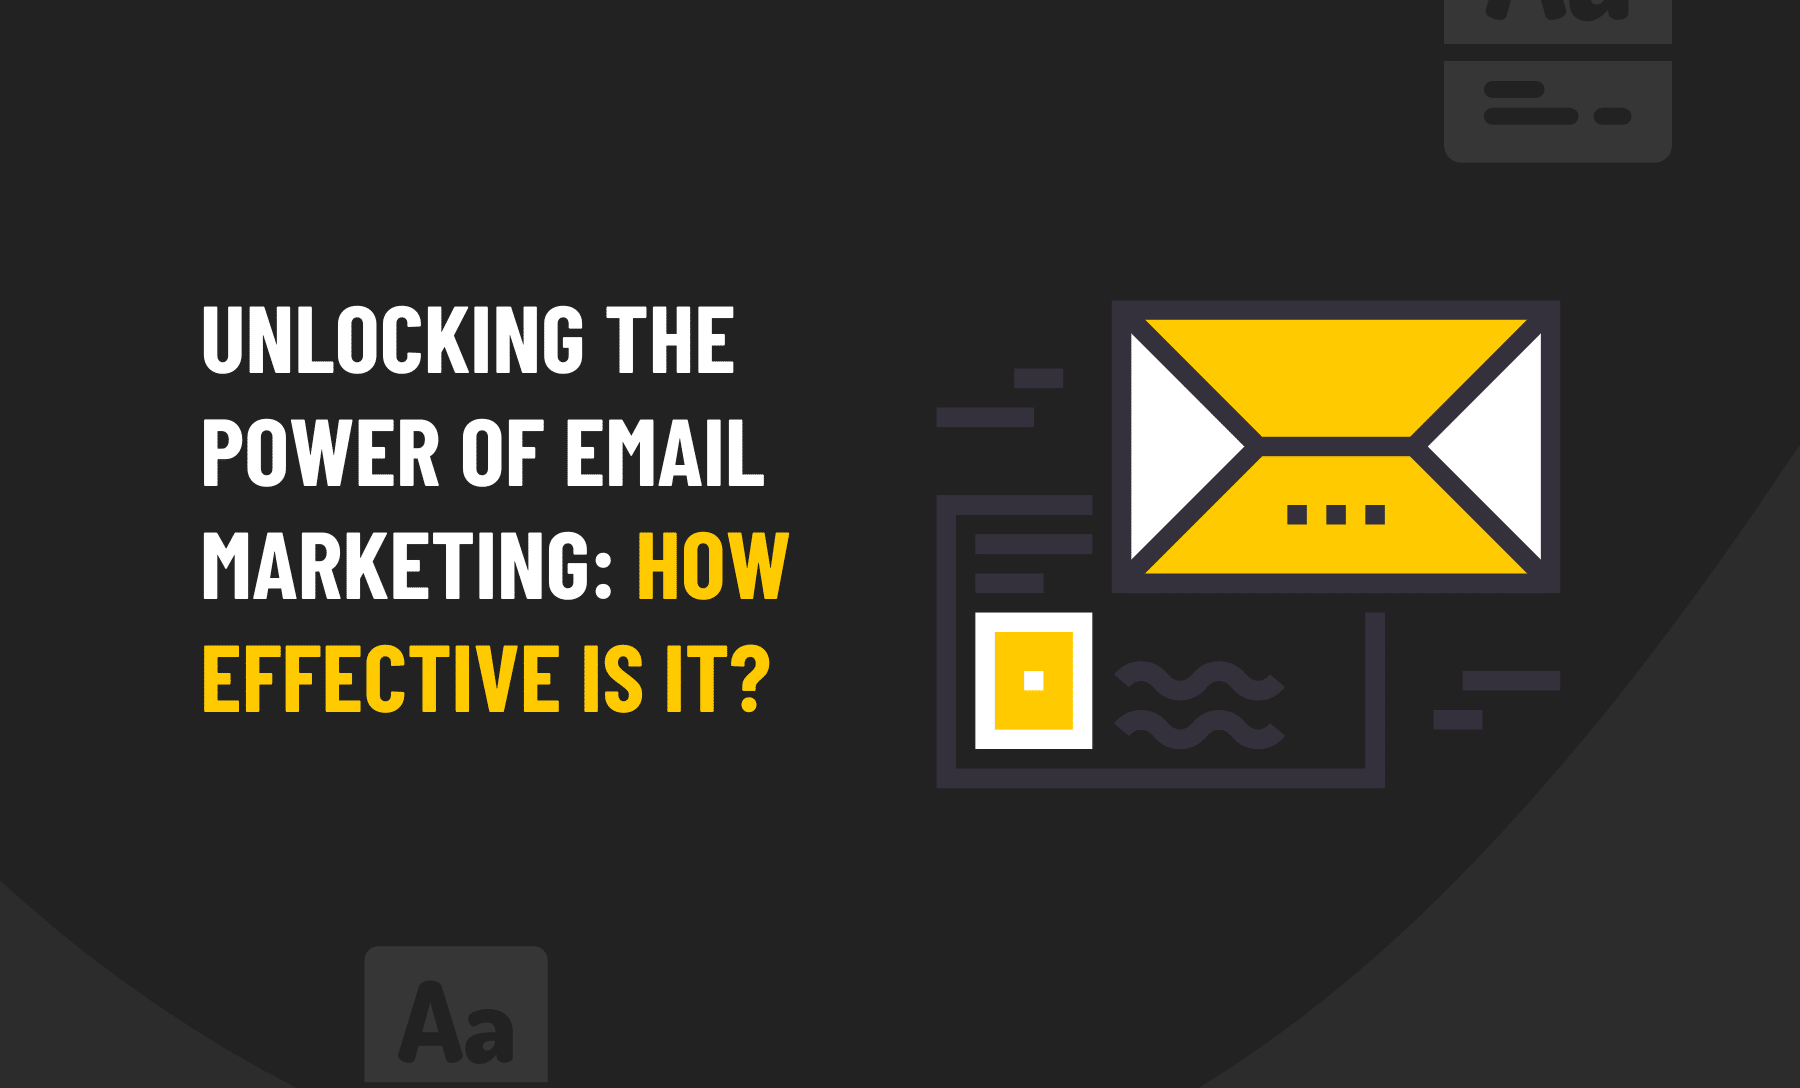 Unlocking the power of email marketing